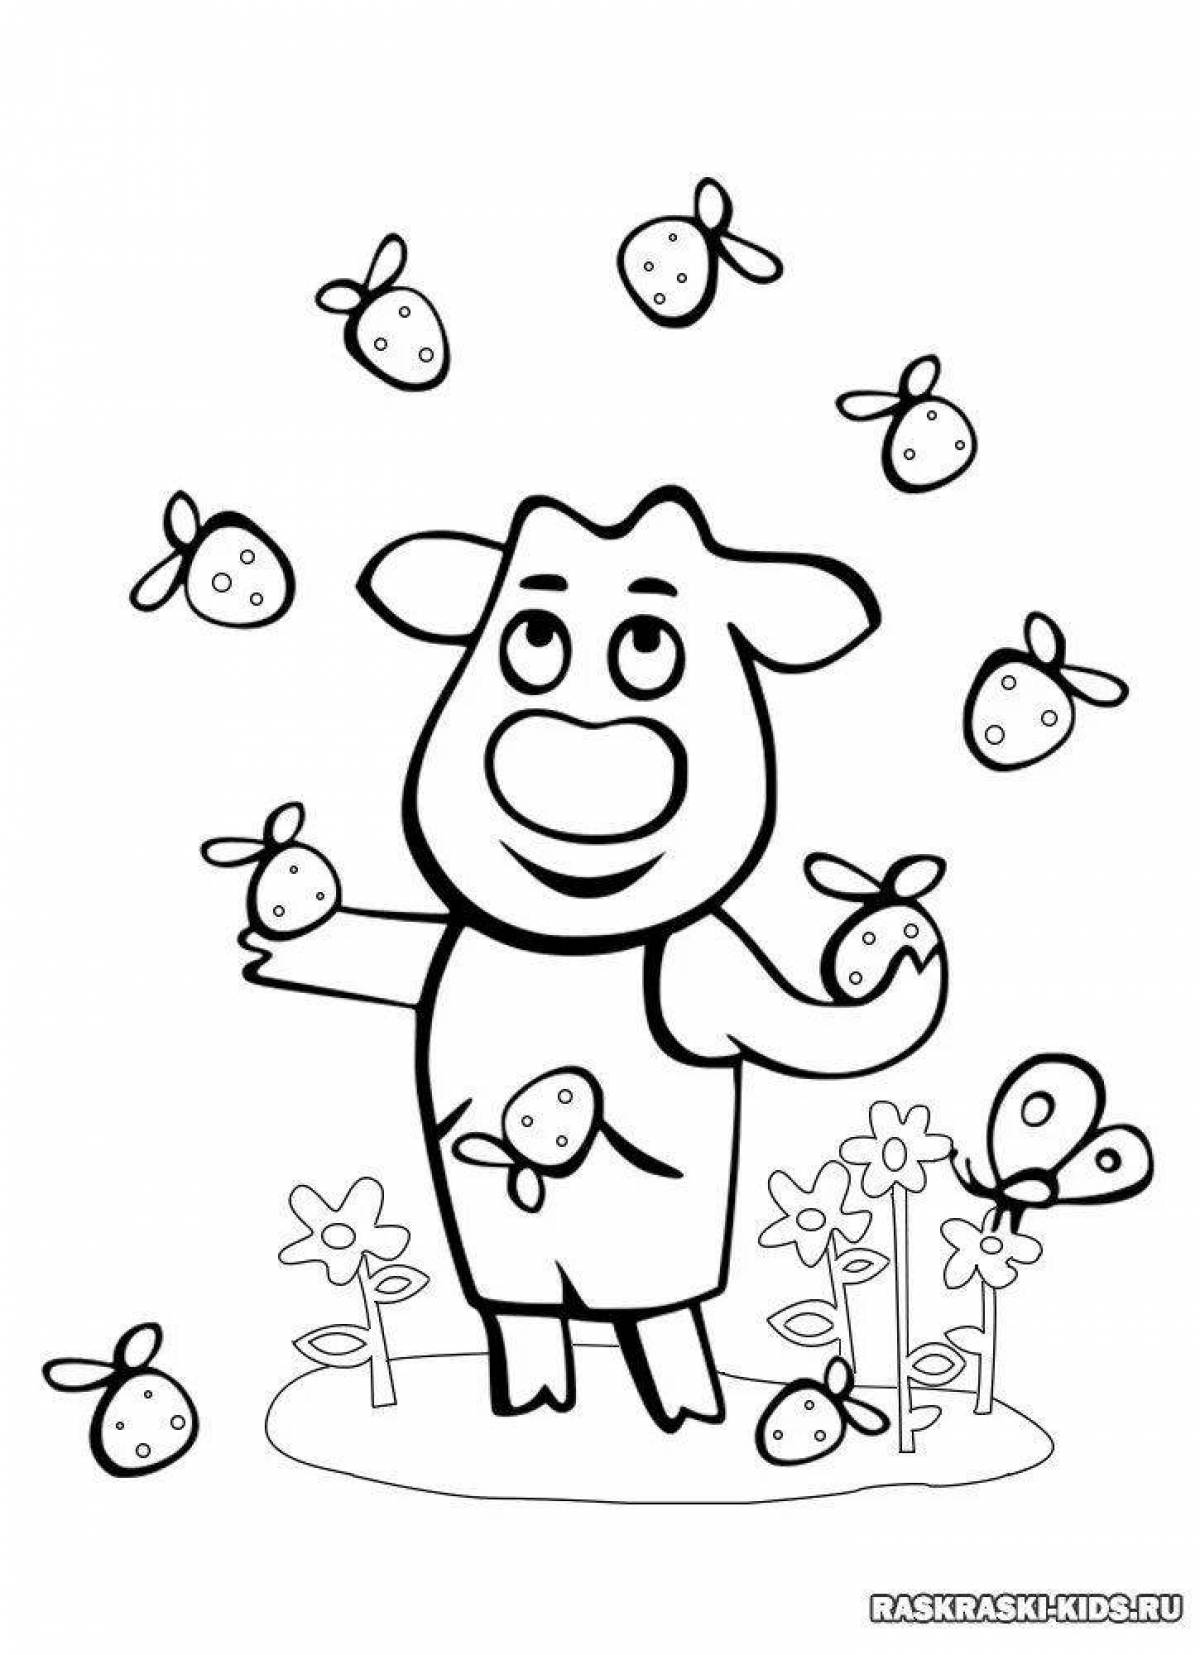 A bright orange cow coloring pages for kids